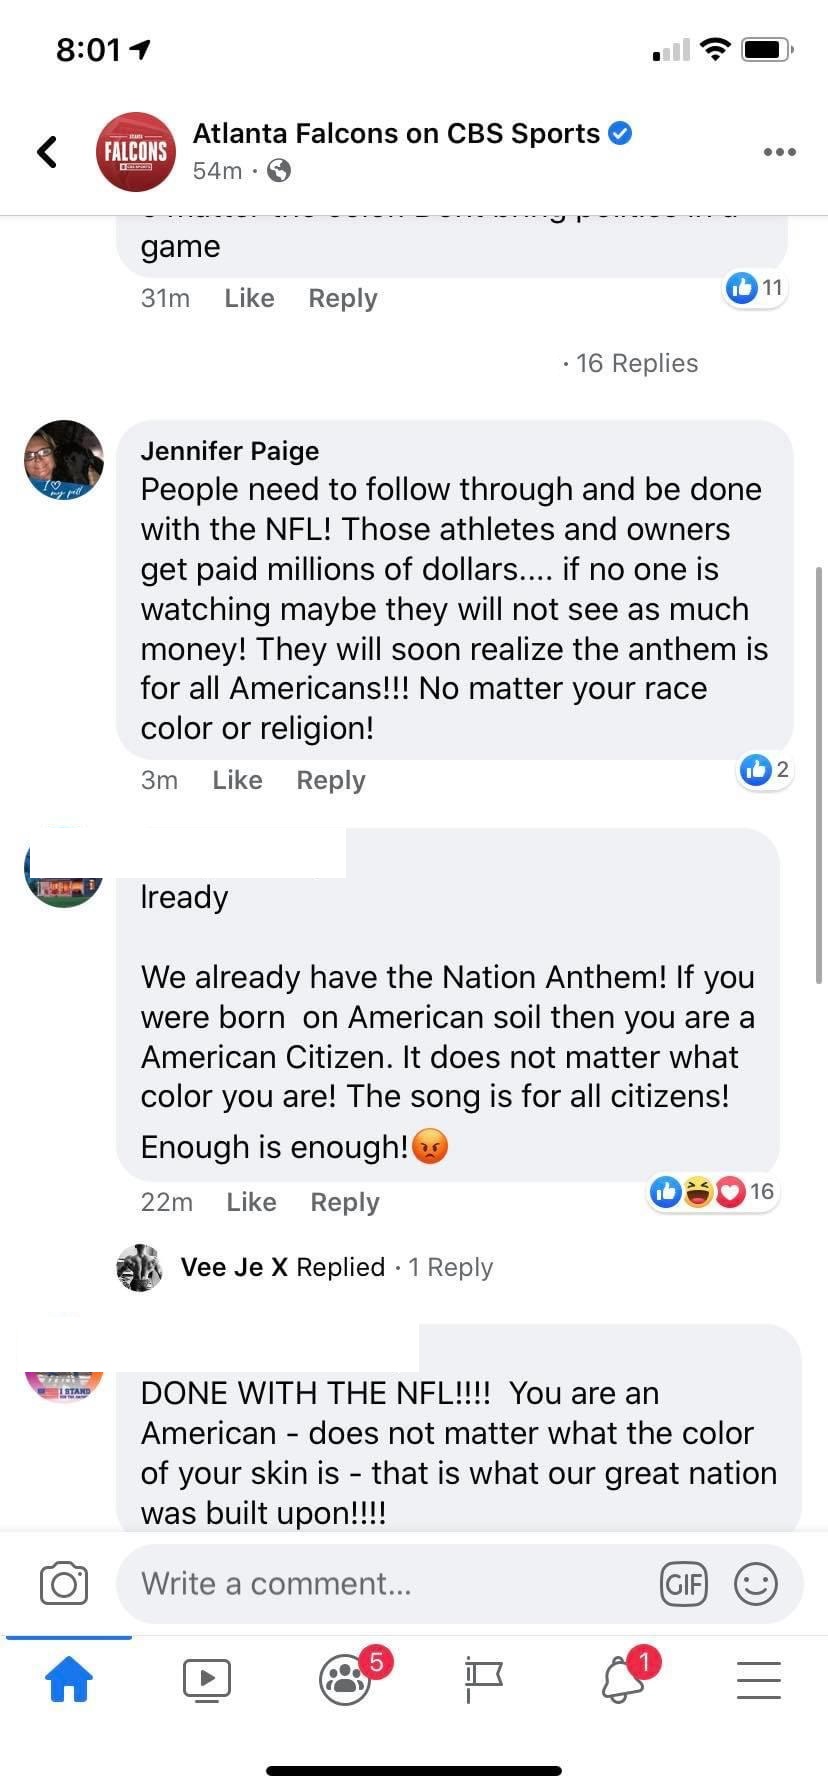 Jennifer Paige, a teacher at Cobb County Schools, in Georgia, is not a fan of the NFL's plans. Yesterday, the NFL announced plans to play the Black National Anthem before the Star Spangled Banner, the official US National Anthem, which takes place before every game. Because of this, Paige angrily says that people need to follow through and not watch the NFL games, to cut into their earnings.